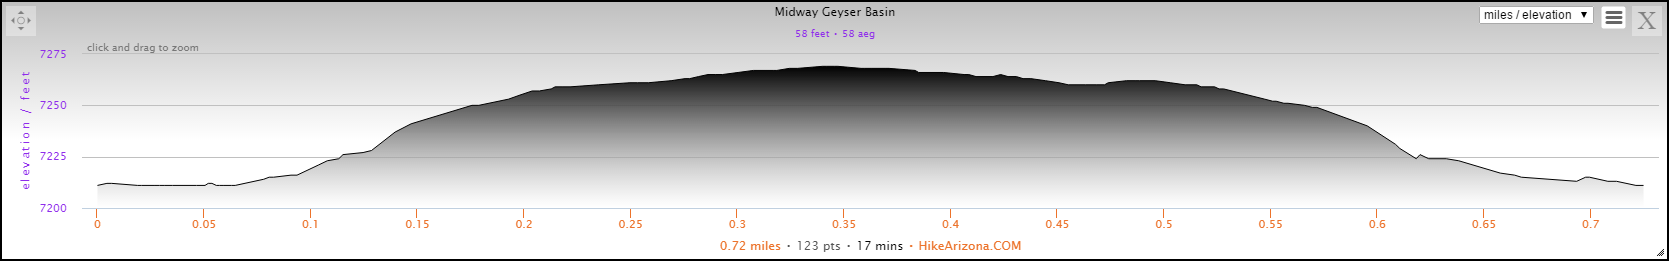 Elevation Profile for the Midway Geyser Basin Boardwalk in Yellowstone National Park